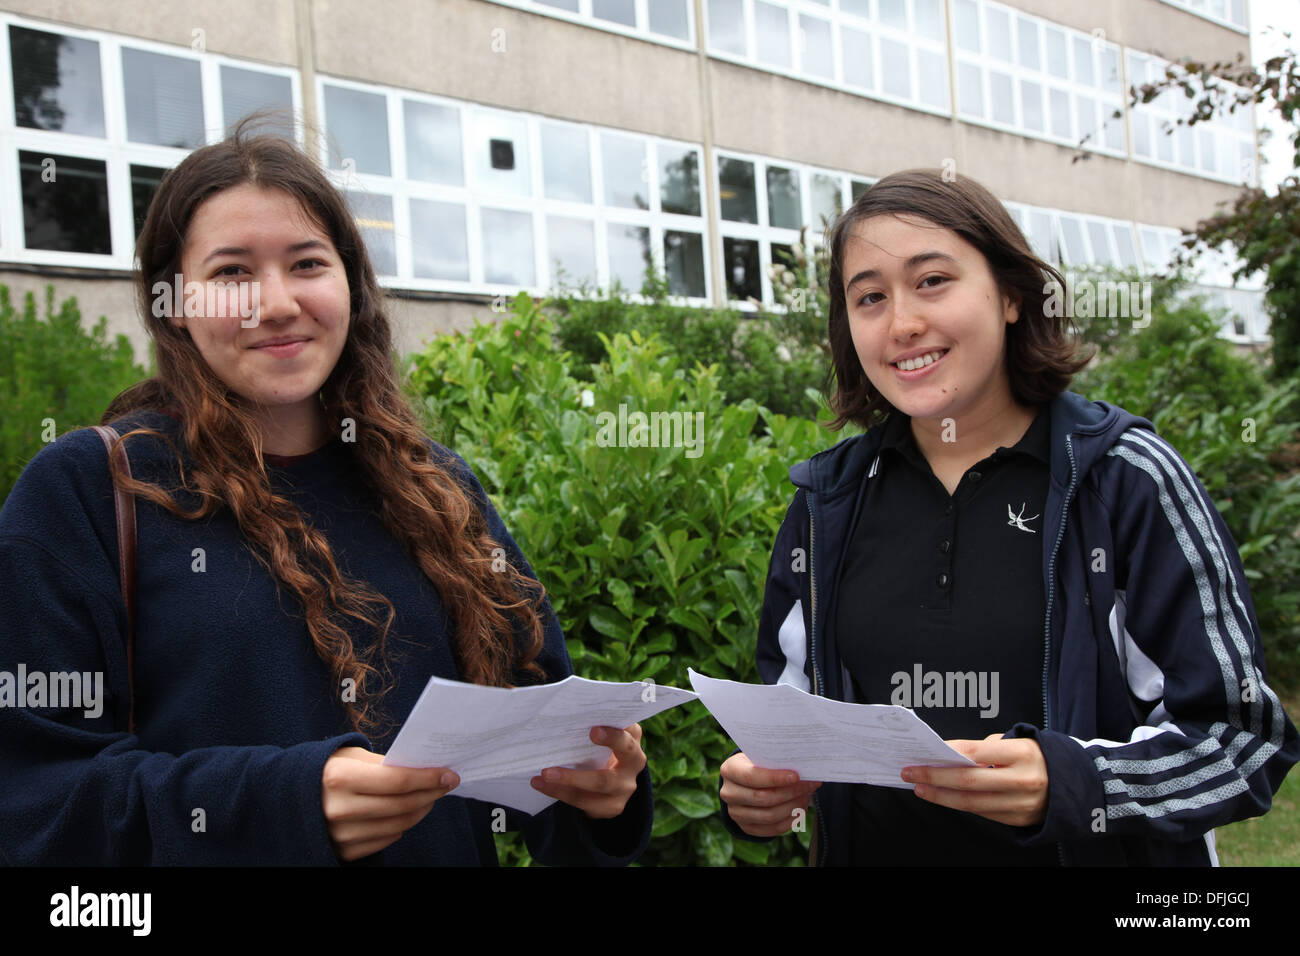 Girls with results from their AS-level exams, a qualification ranked between GCSE and A-level often taken at the age of 17. Stock Photo